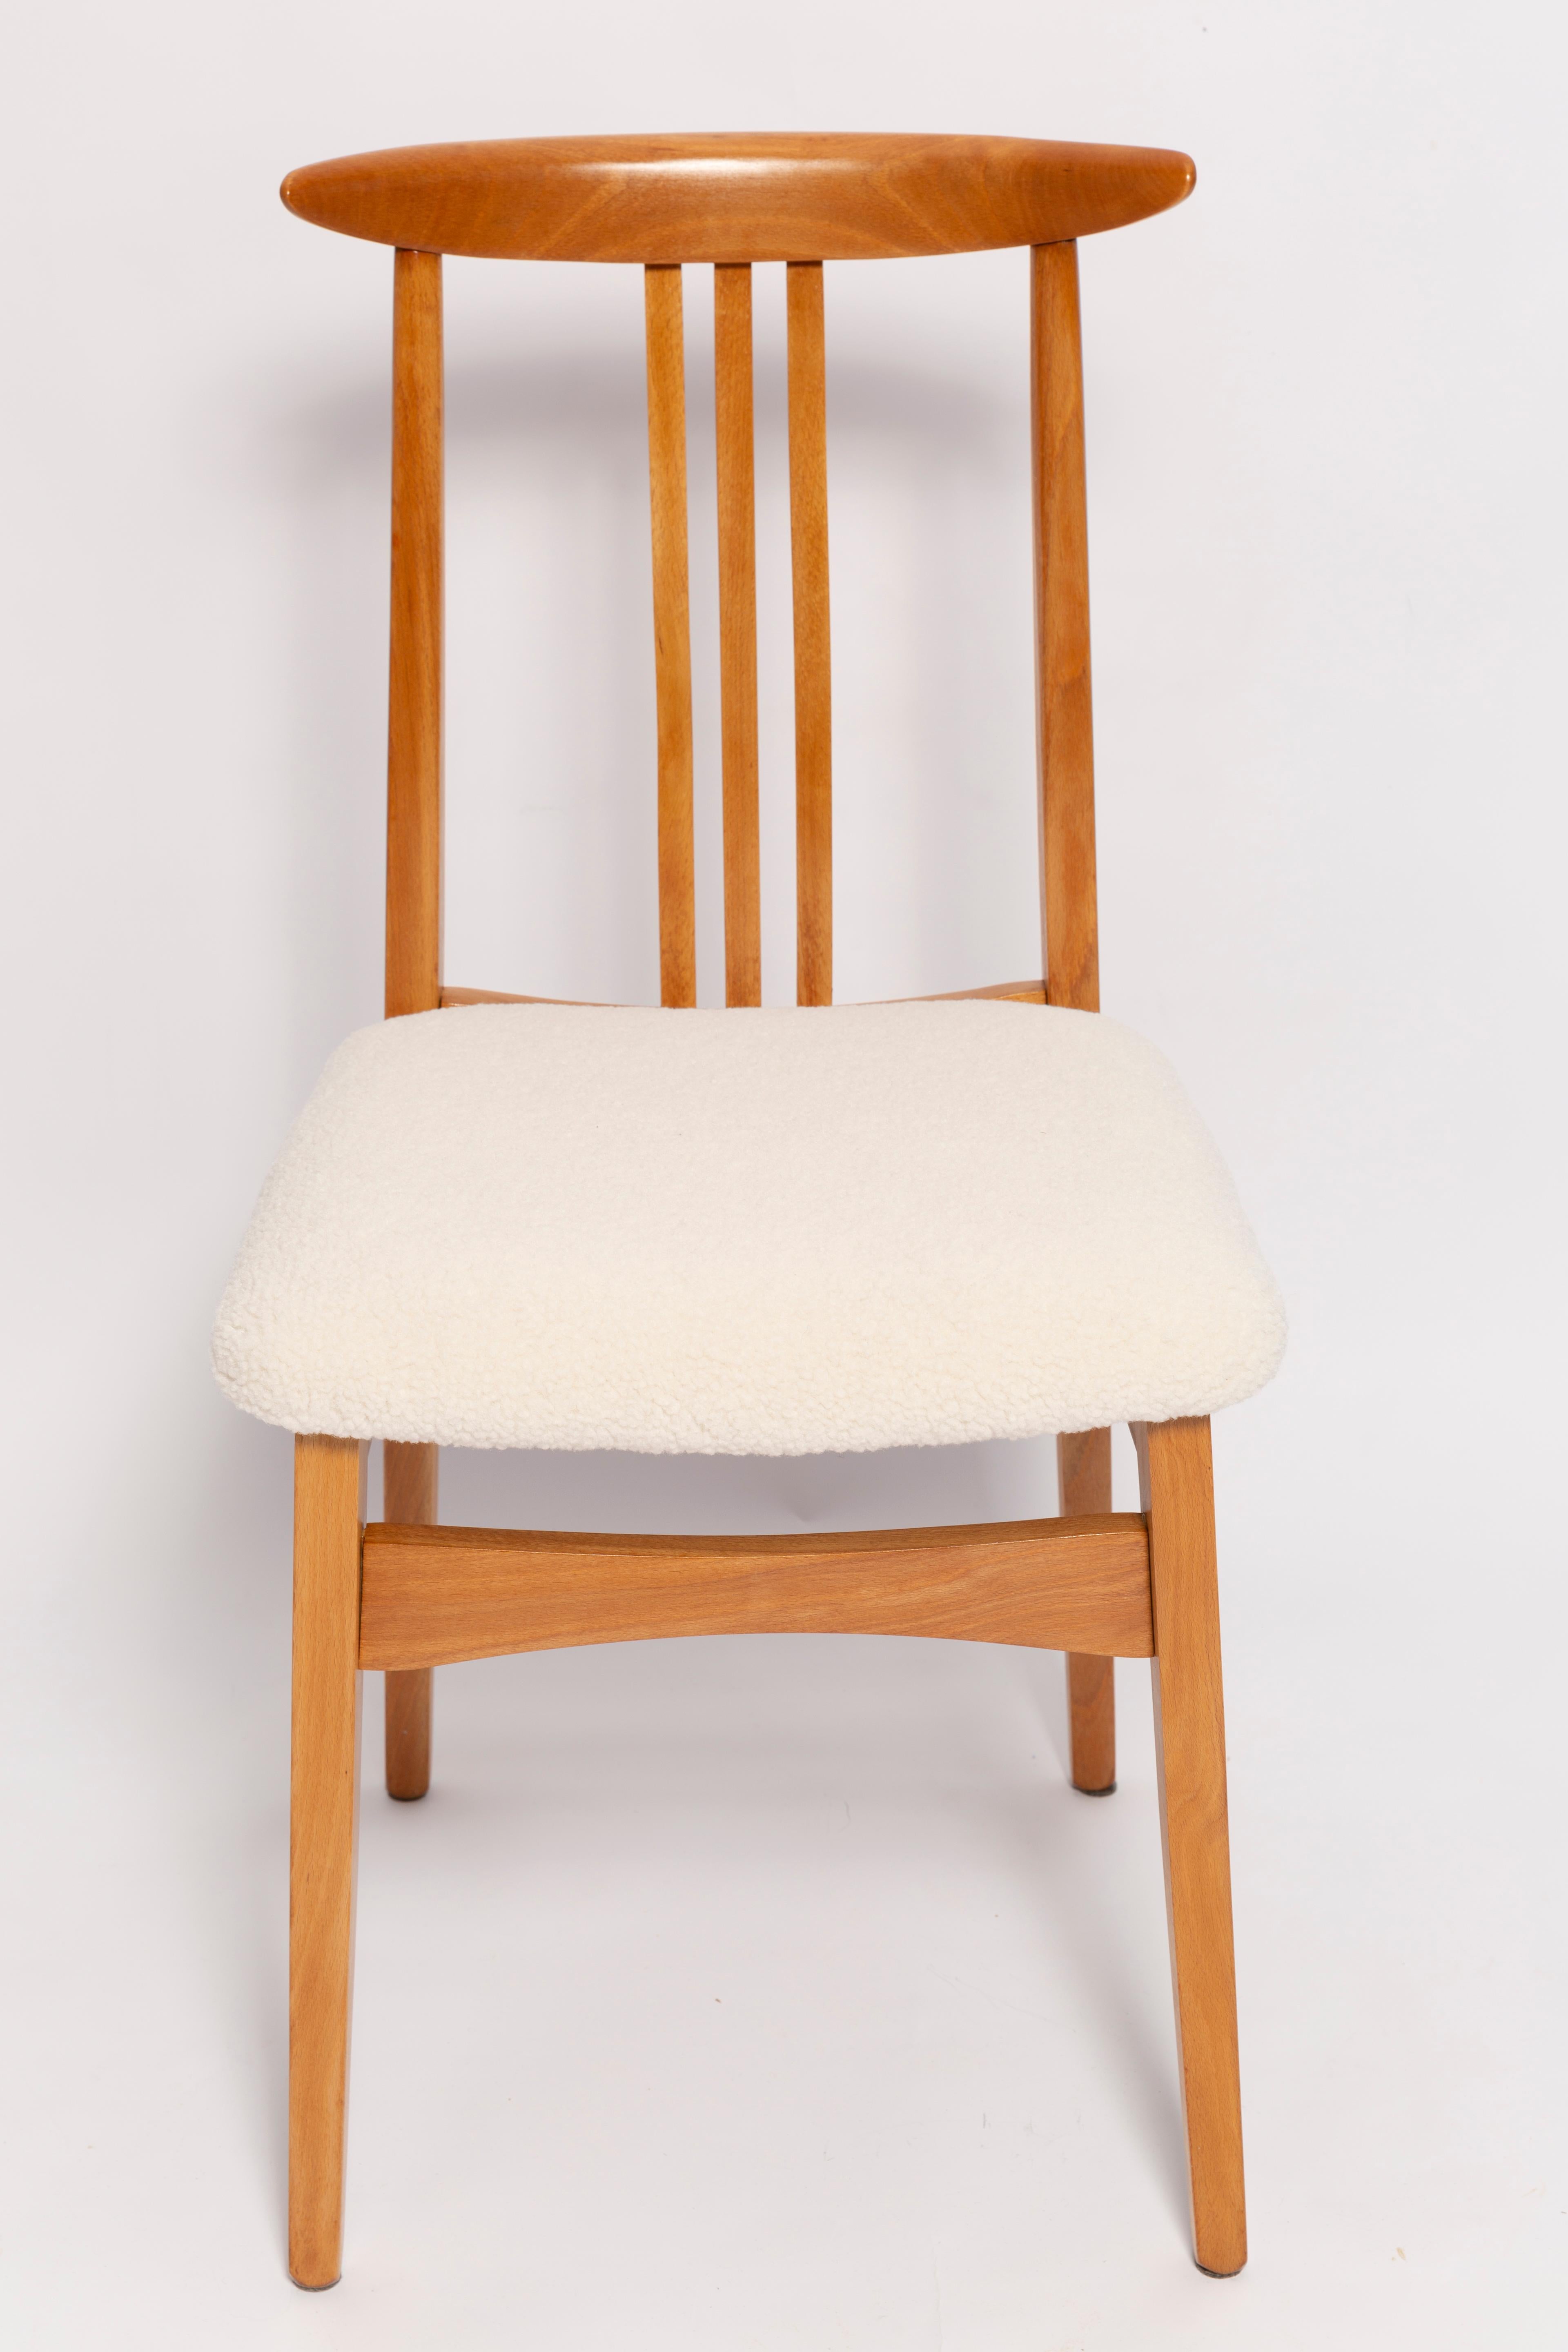 Polish Set of Ten Mid-Century Cream Ivory Boucle Chairs, by M. Zielinski, Europe, 1960s For Sale